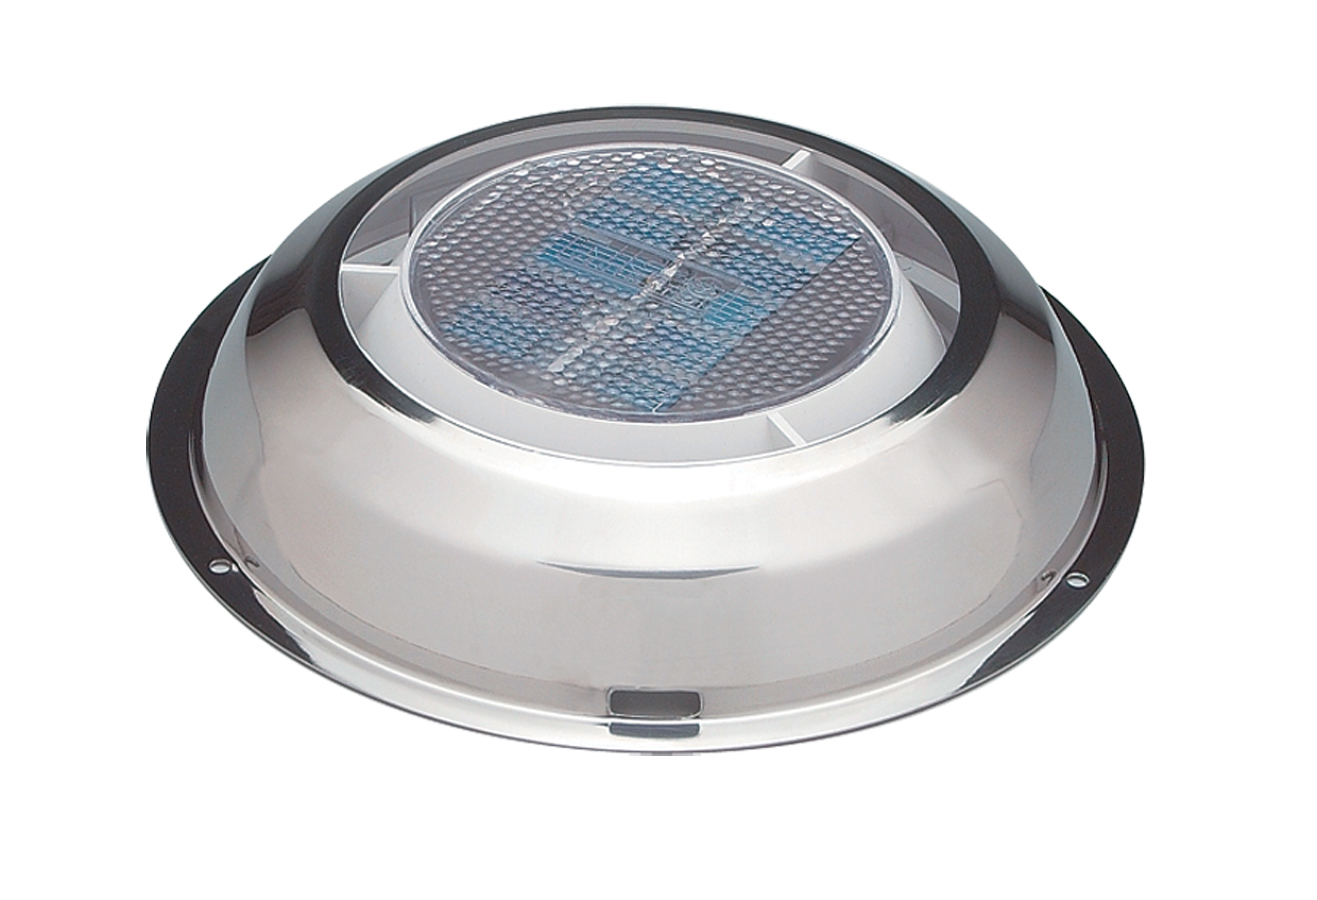 Marinco Solar Powered and Passive Vents